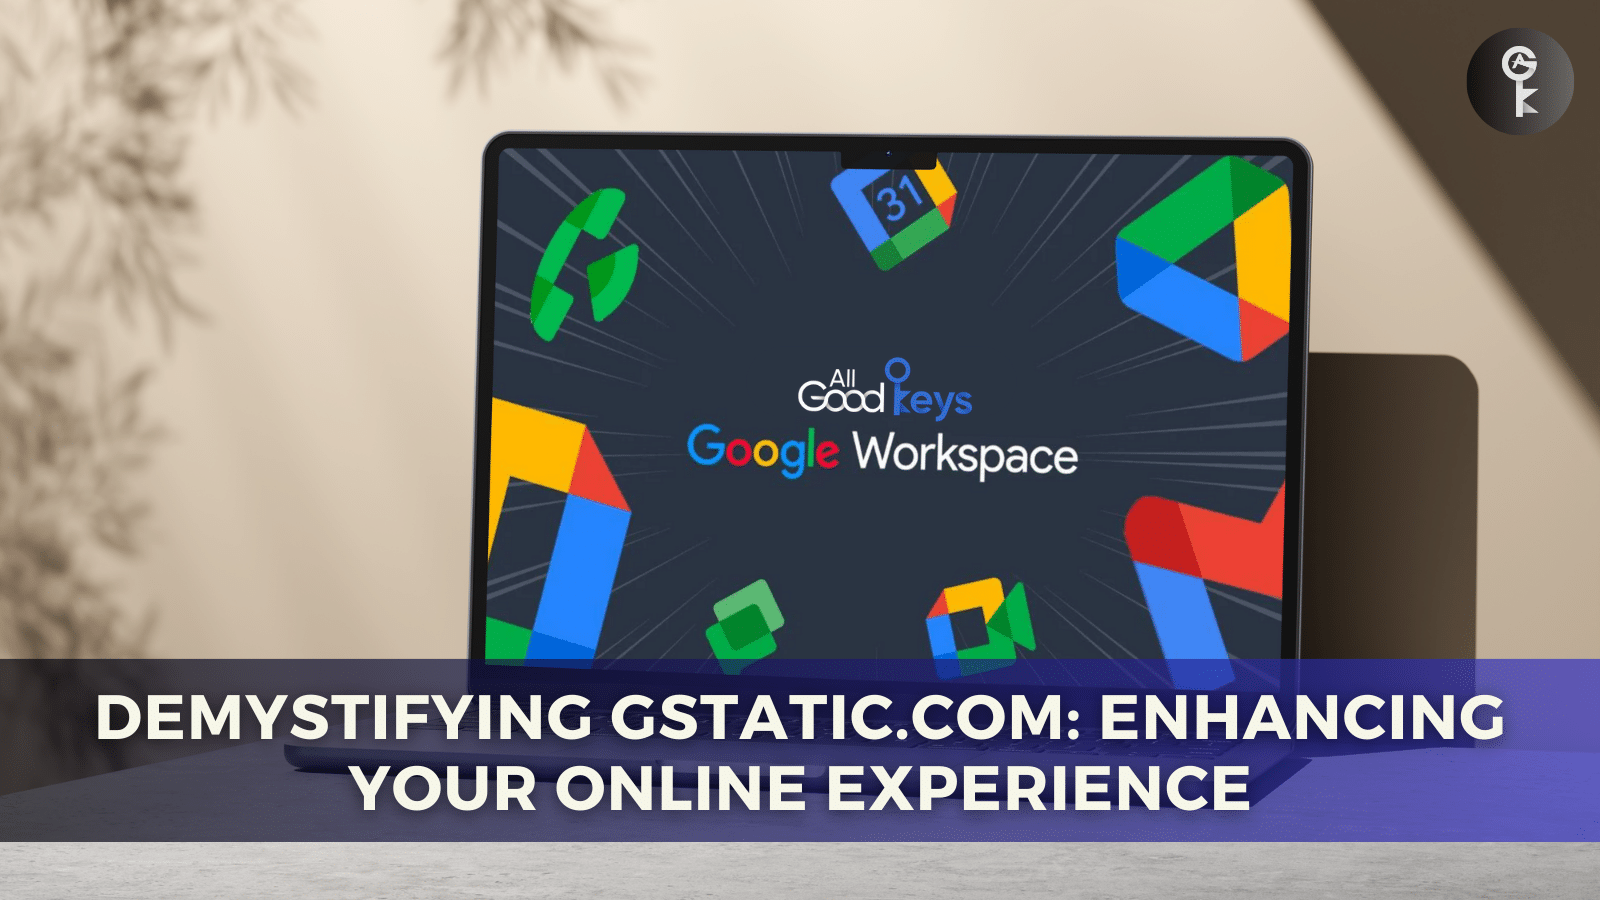 Demystifying Gstatic.com: Enhancing Your Online Experience